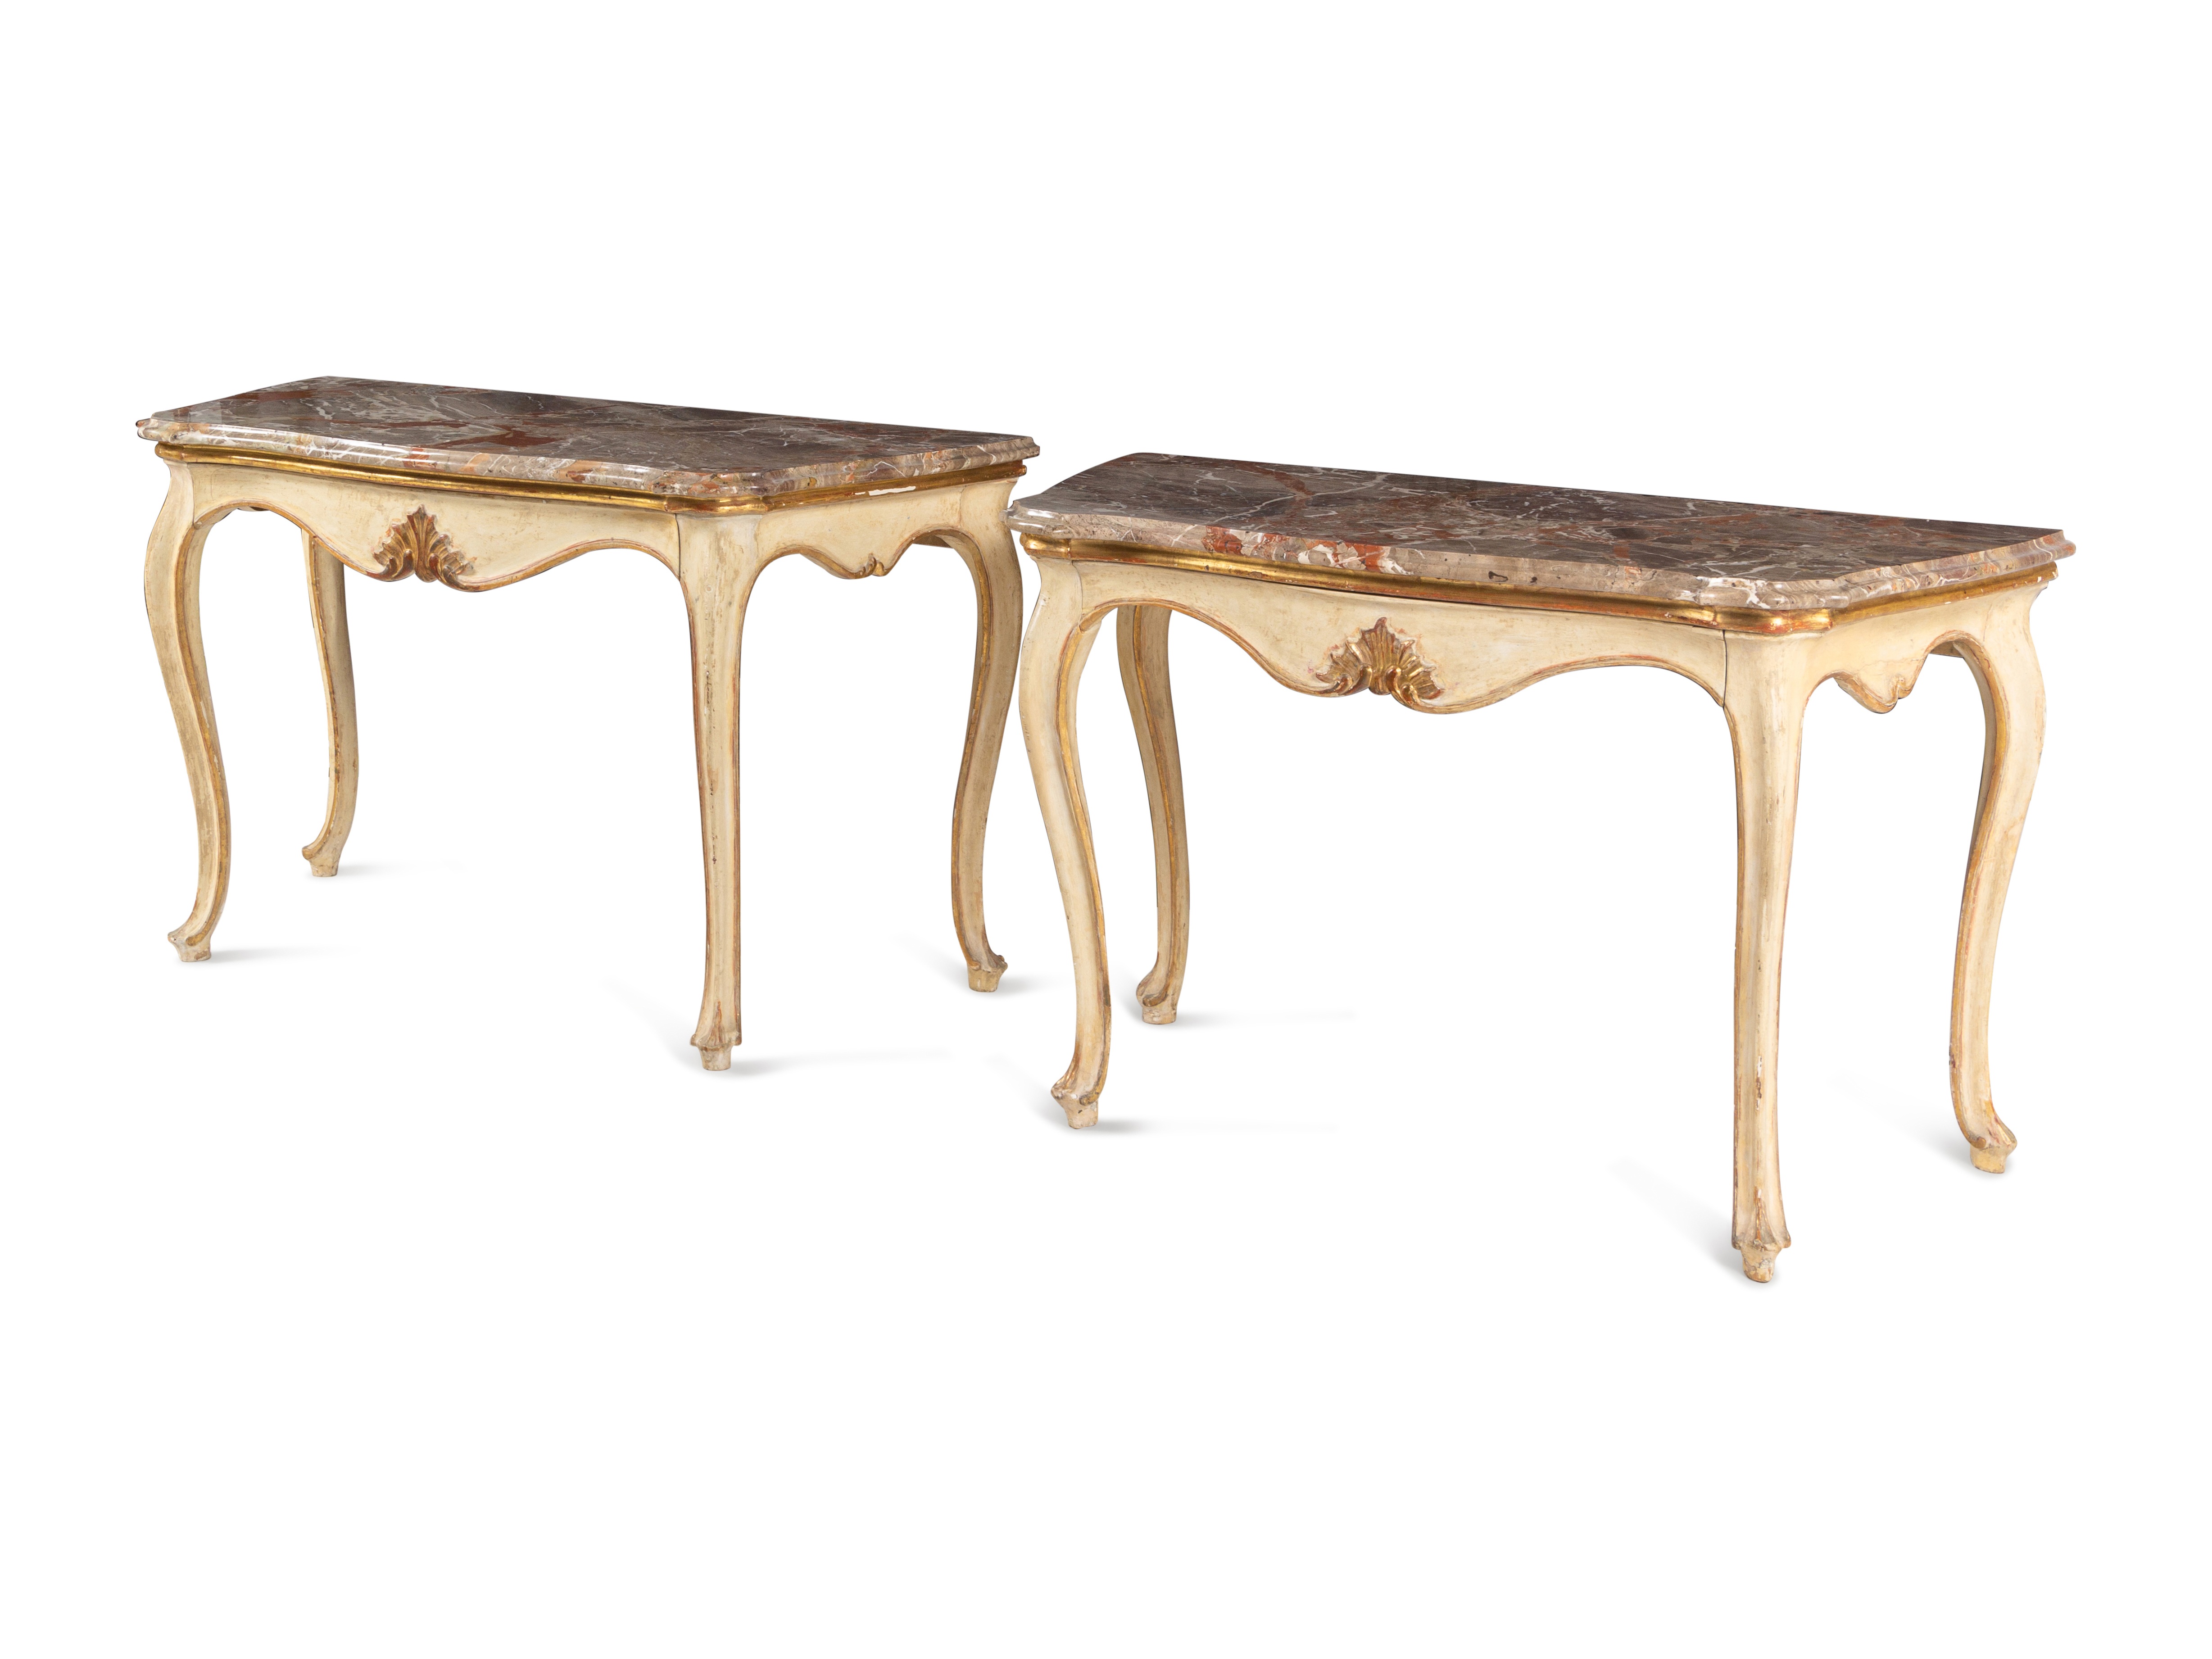 A Pair of Italian Painted and Parcel-Gilt Marble-Top Console Tables - Image 3 of 6